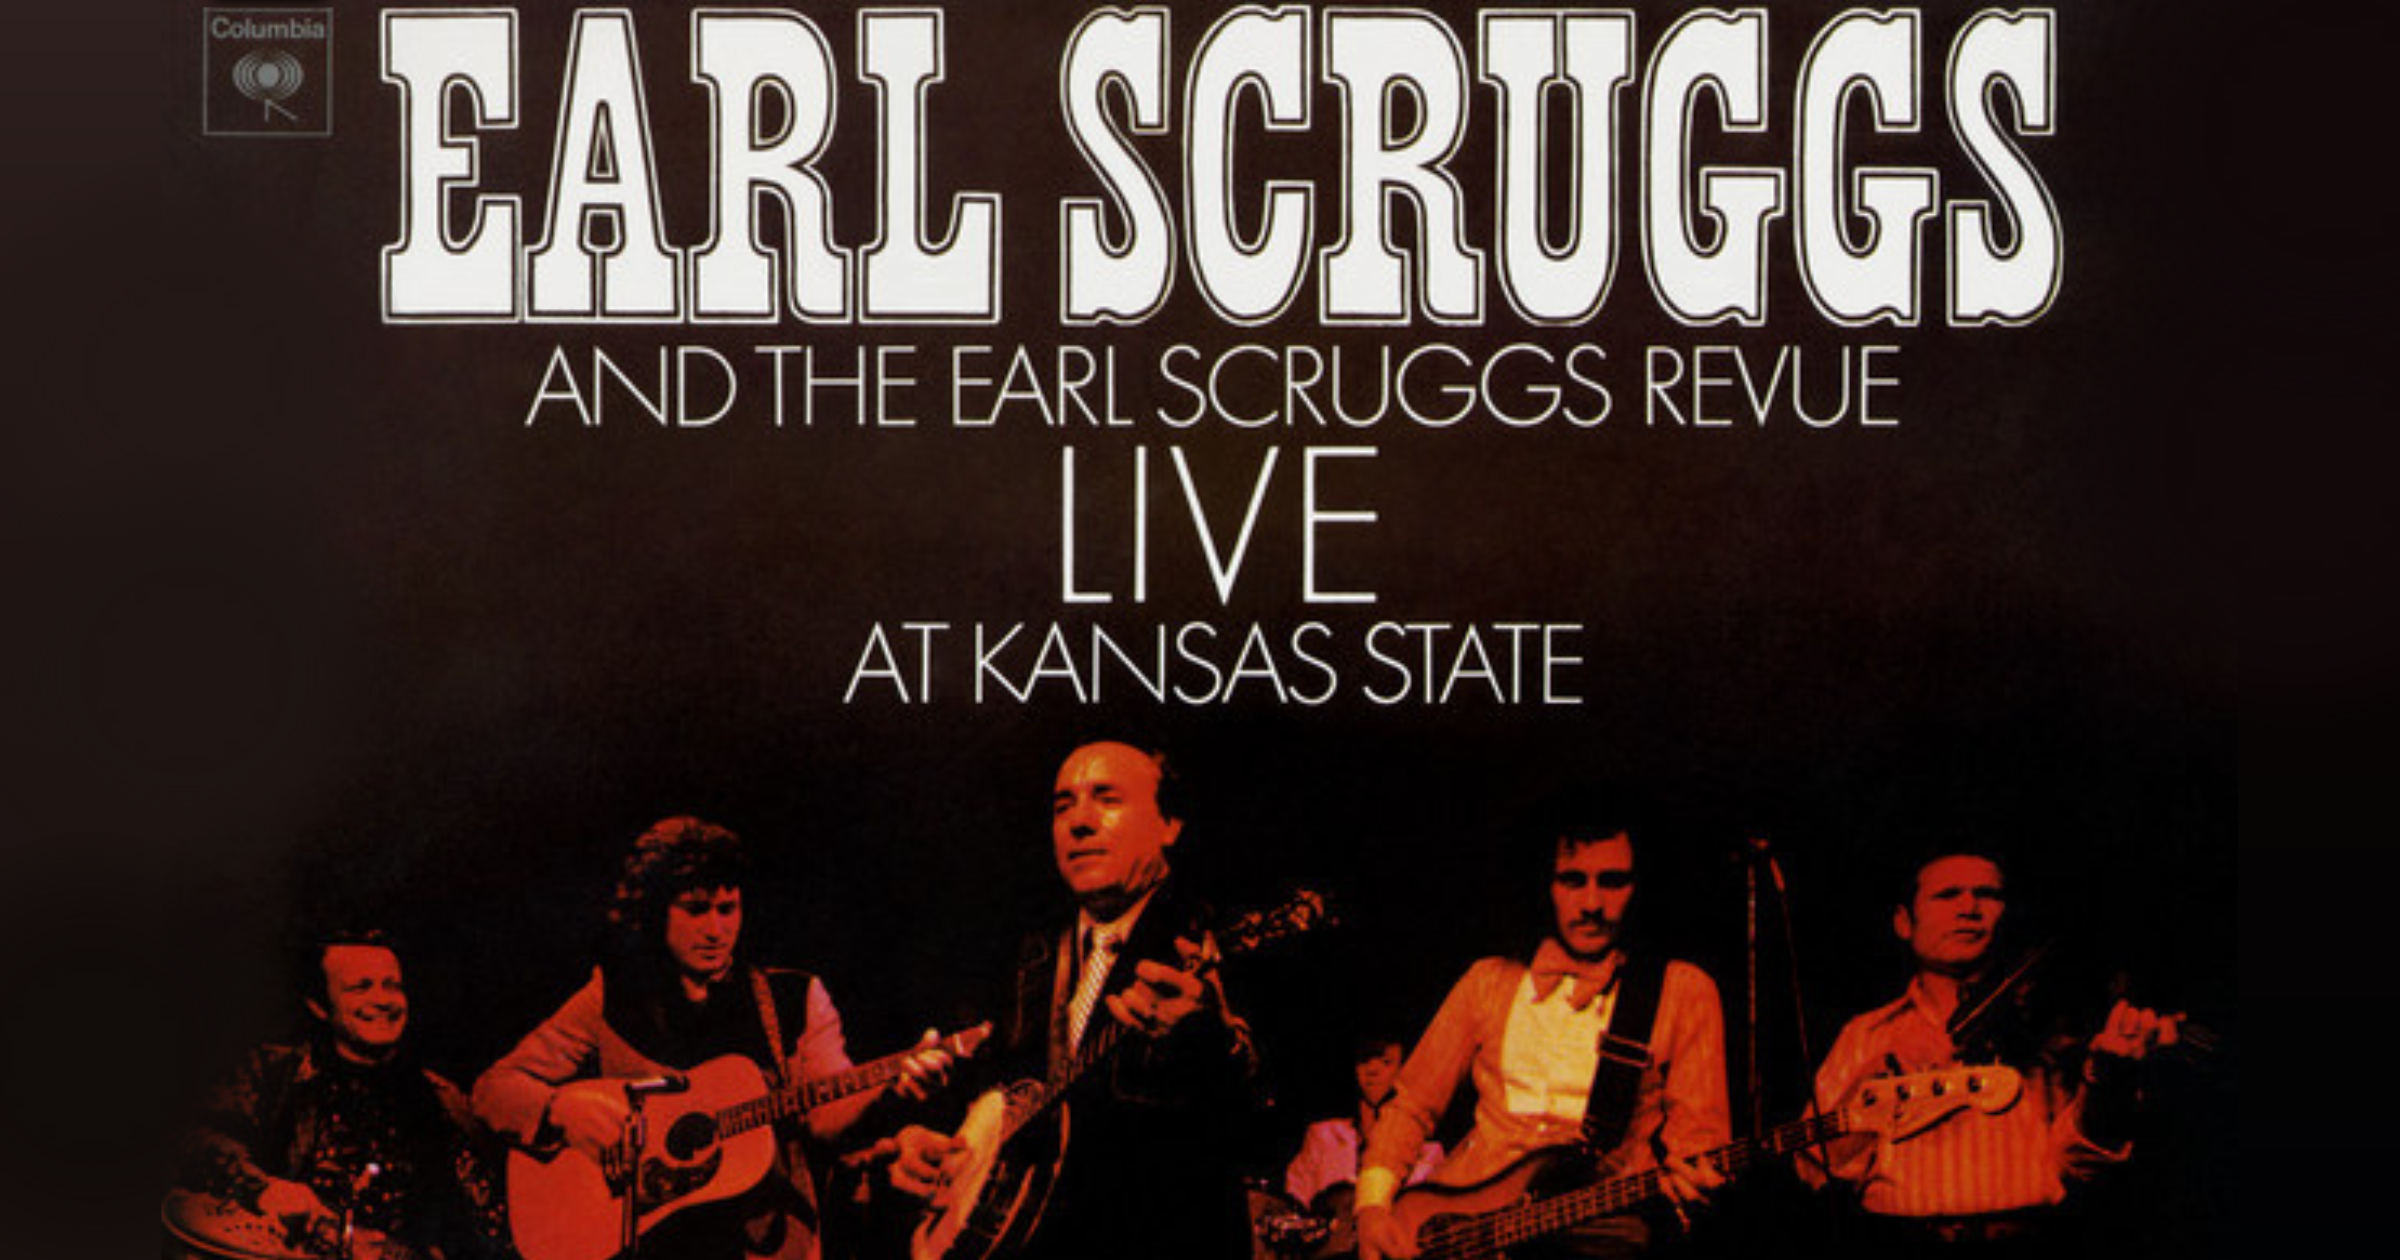 Earl Scruggs Music Festival to Pay Tribute to Iconic 'Live at Kansas State' Album